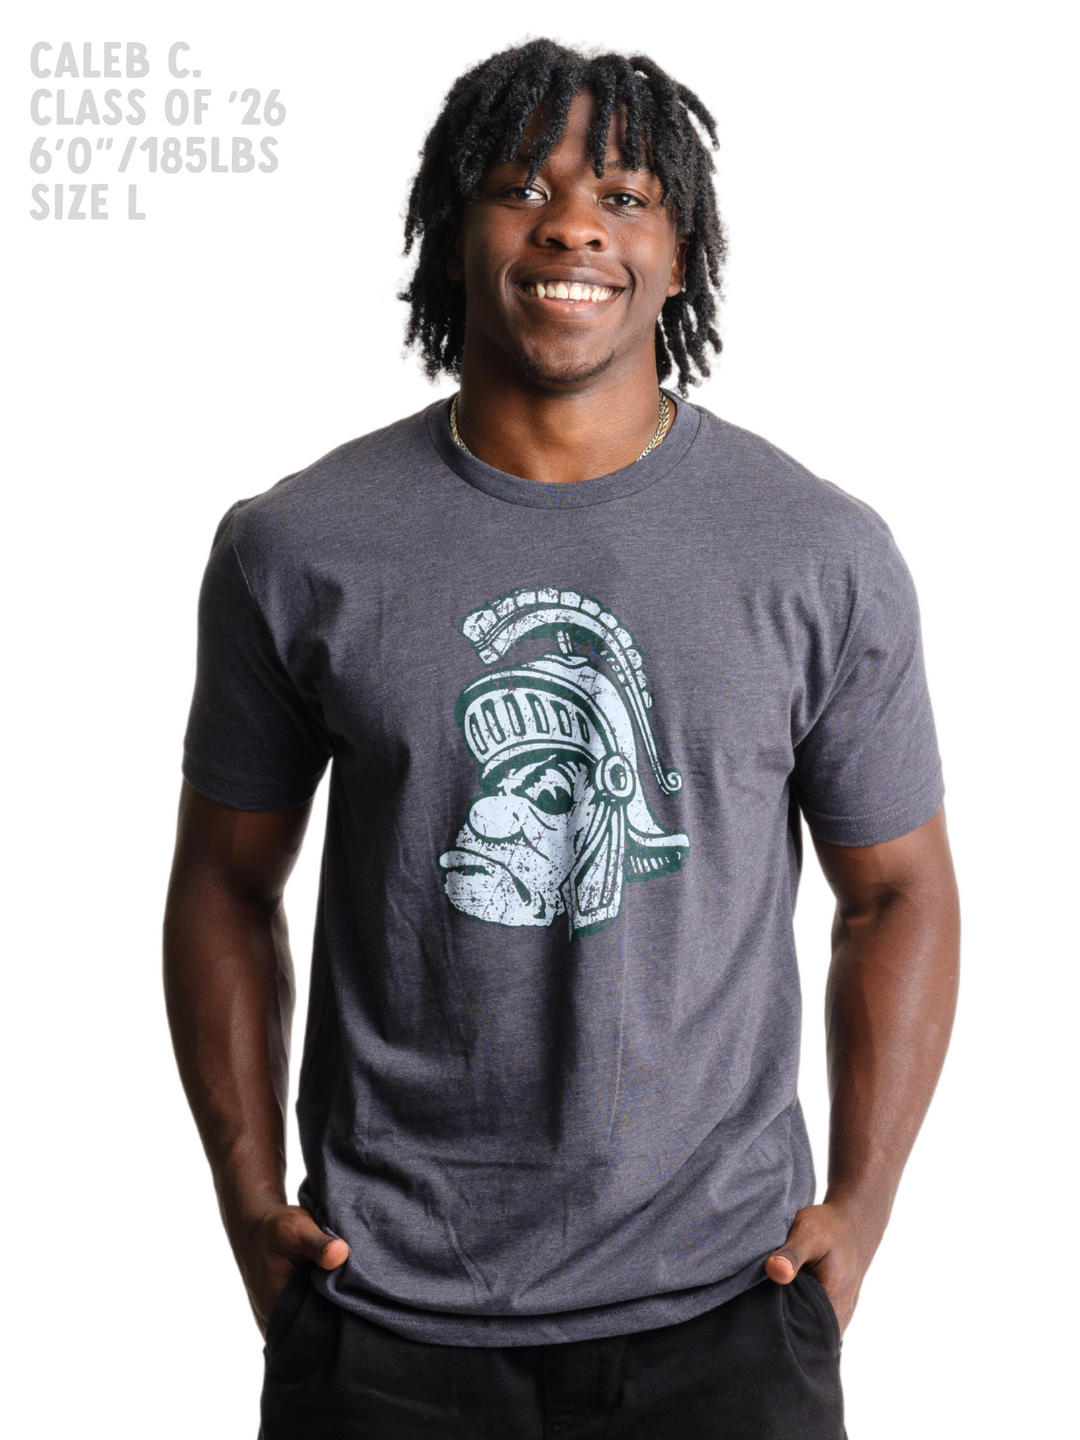 Michigan State University Spartans Vintage Gruff Sparty T-Shirt (Charcoal) - Nudge Printing